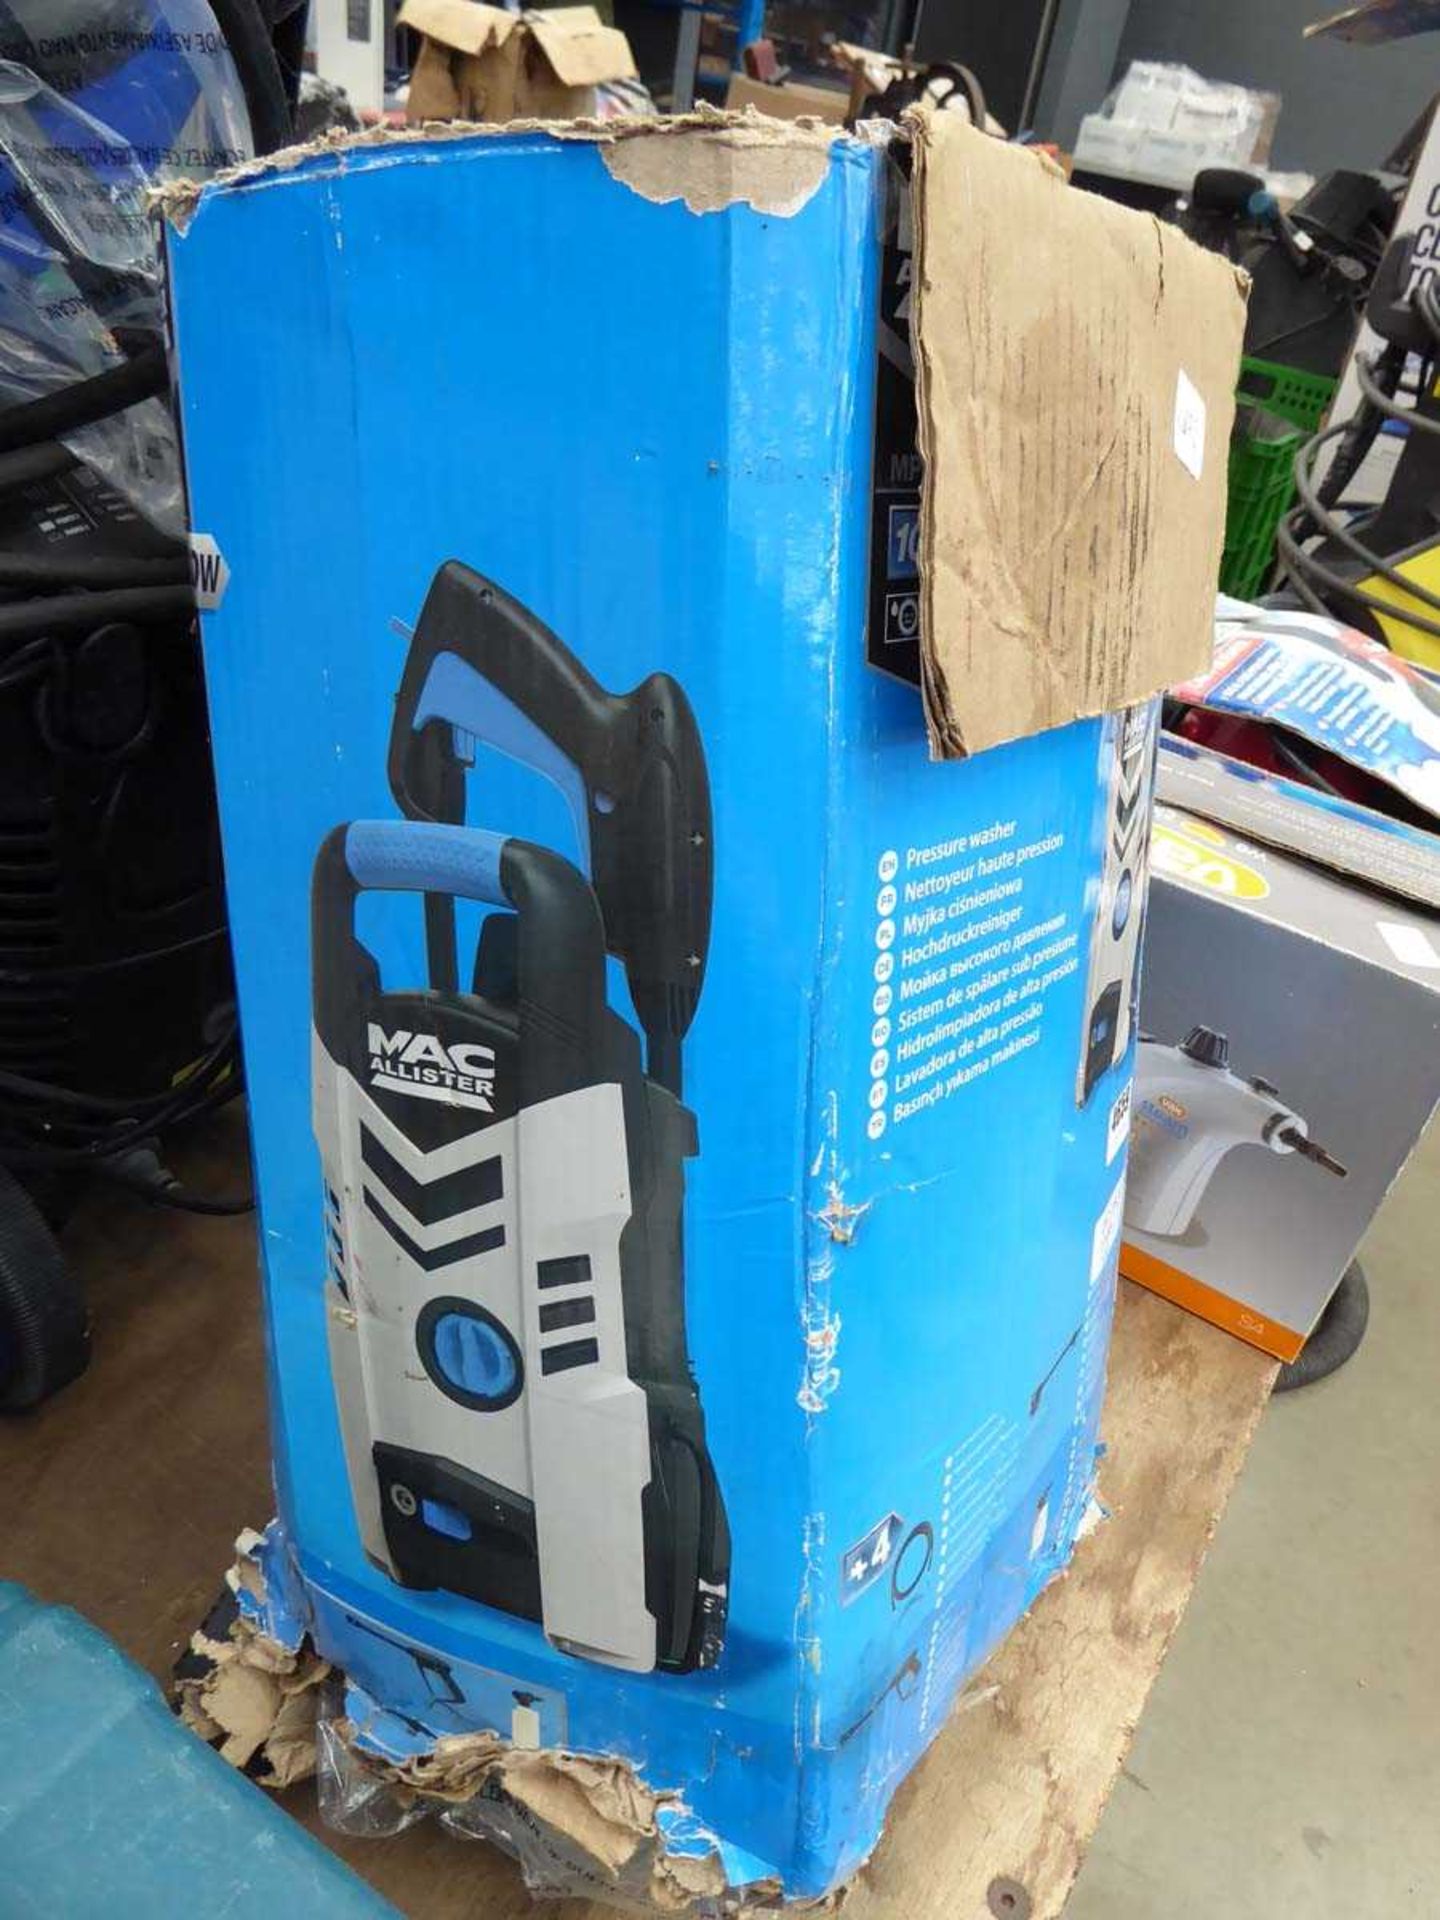 Mccalister electric pressure washer